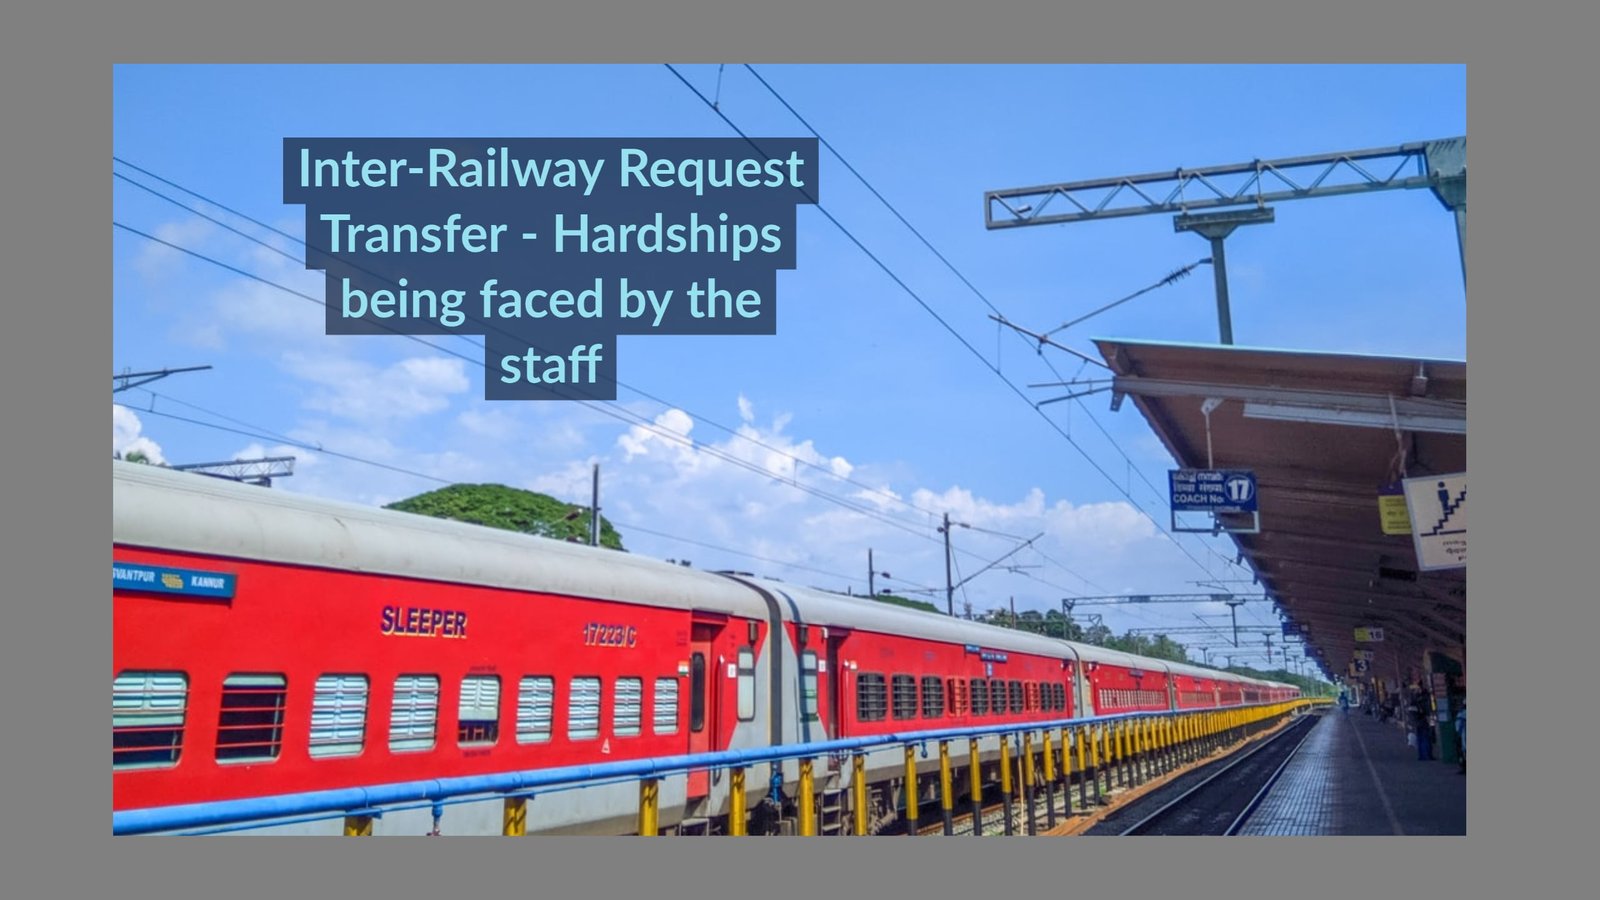 Inter-Railway Request Transfer - Hardships being faced by the staff